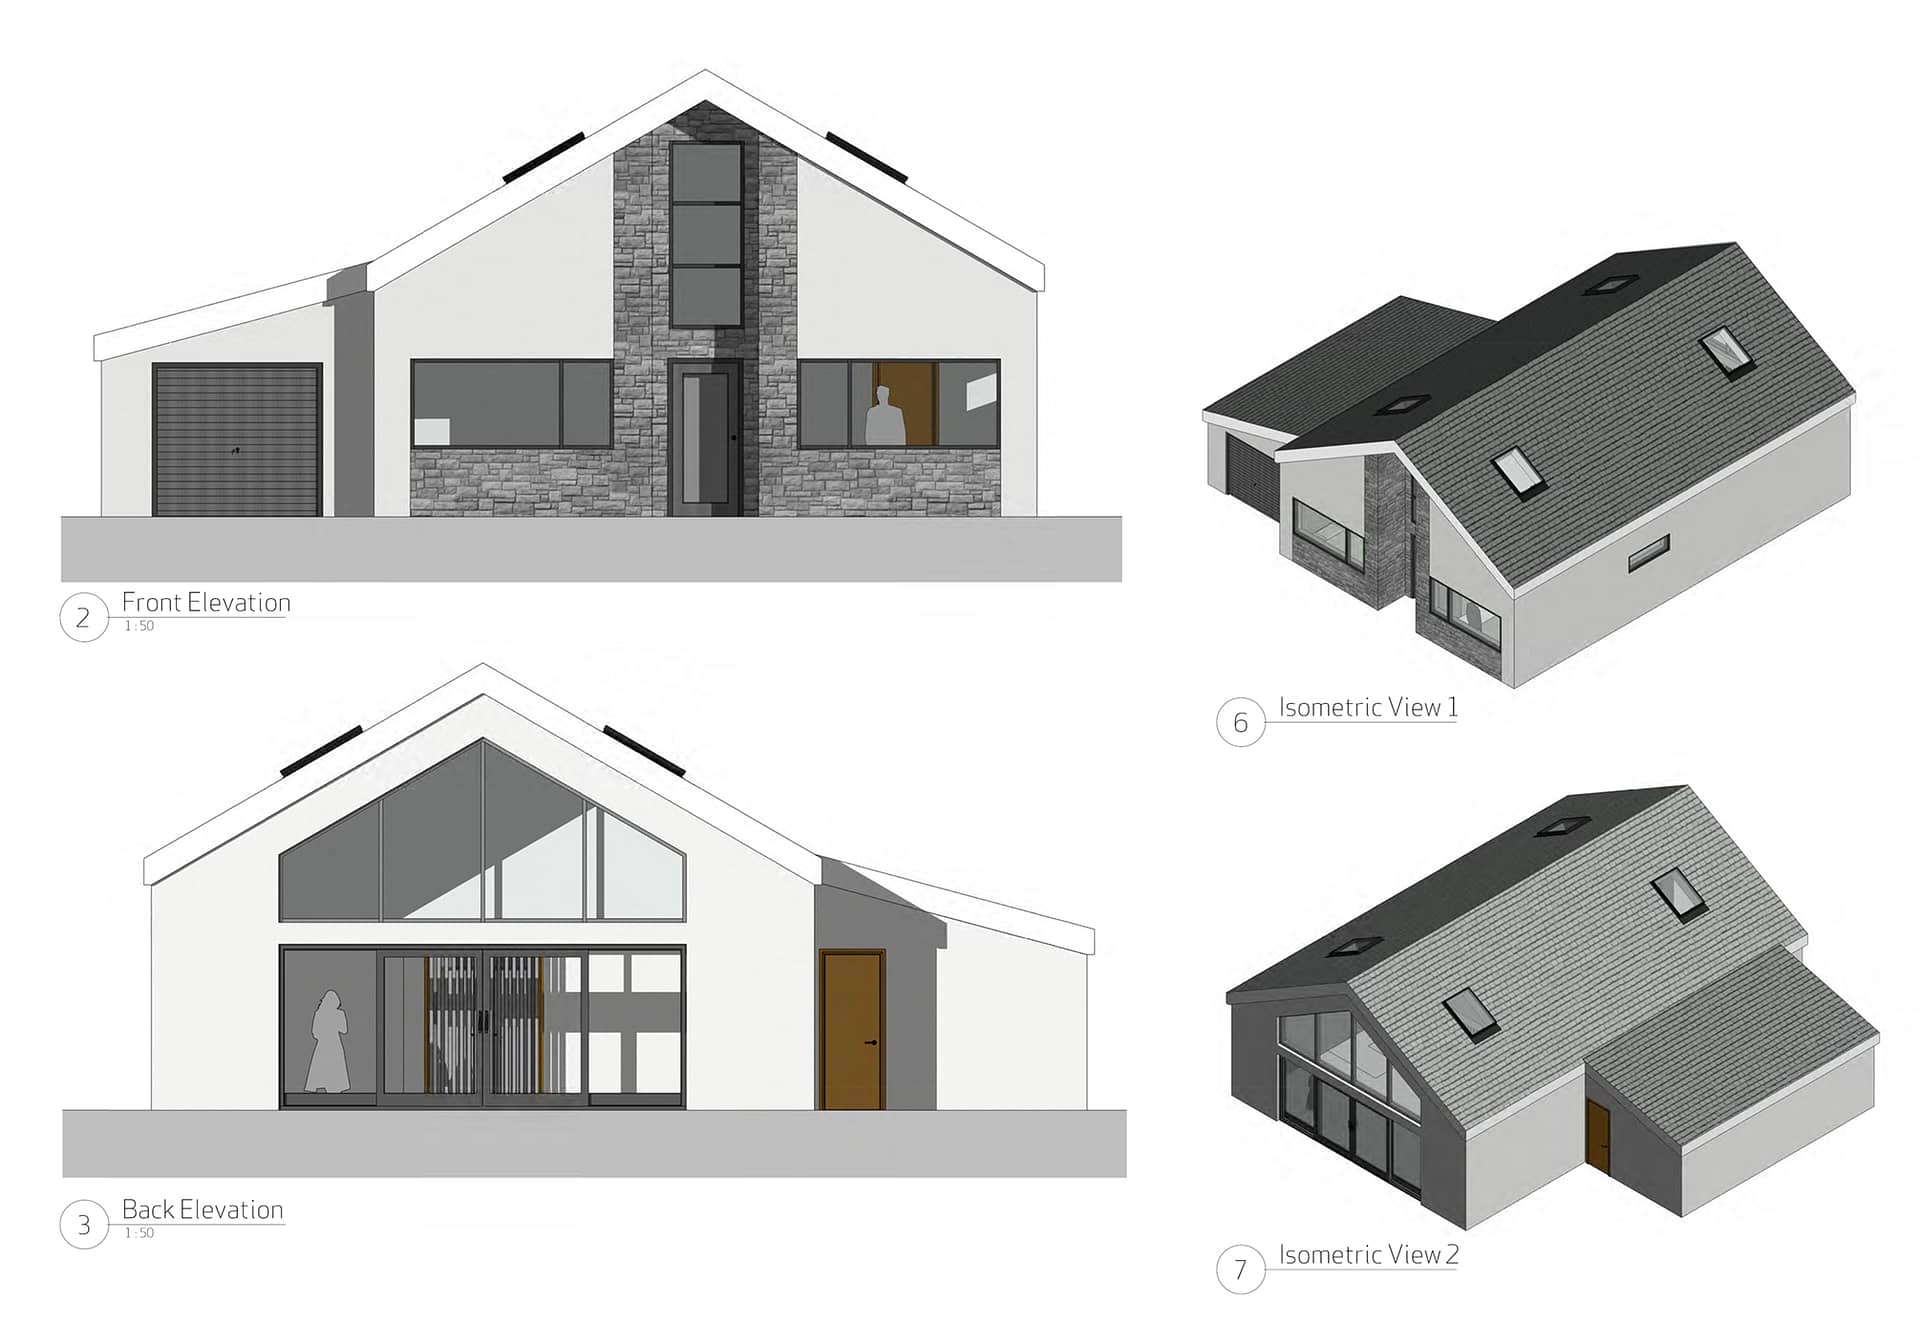 New housing, Godreaman, Wales - Bungalow elevations